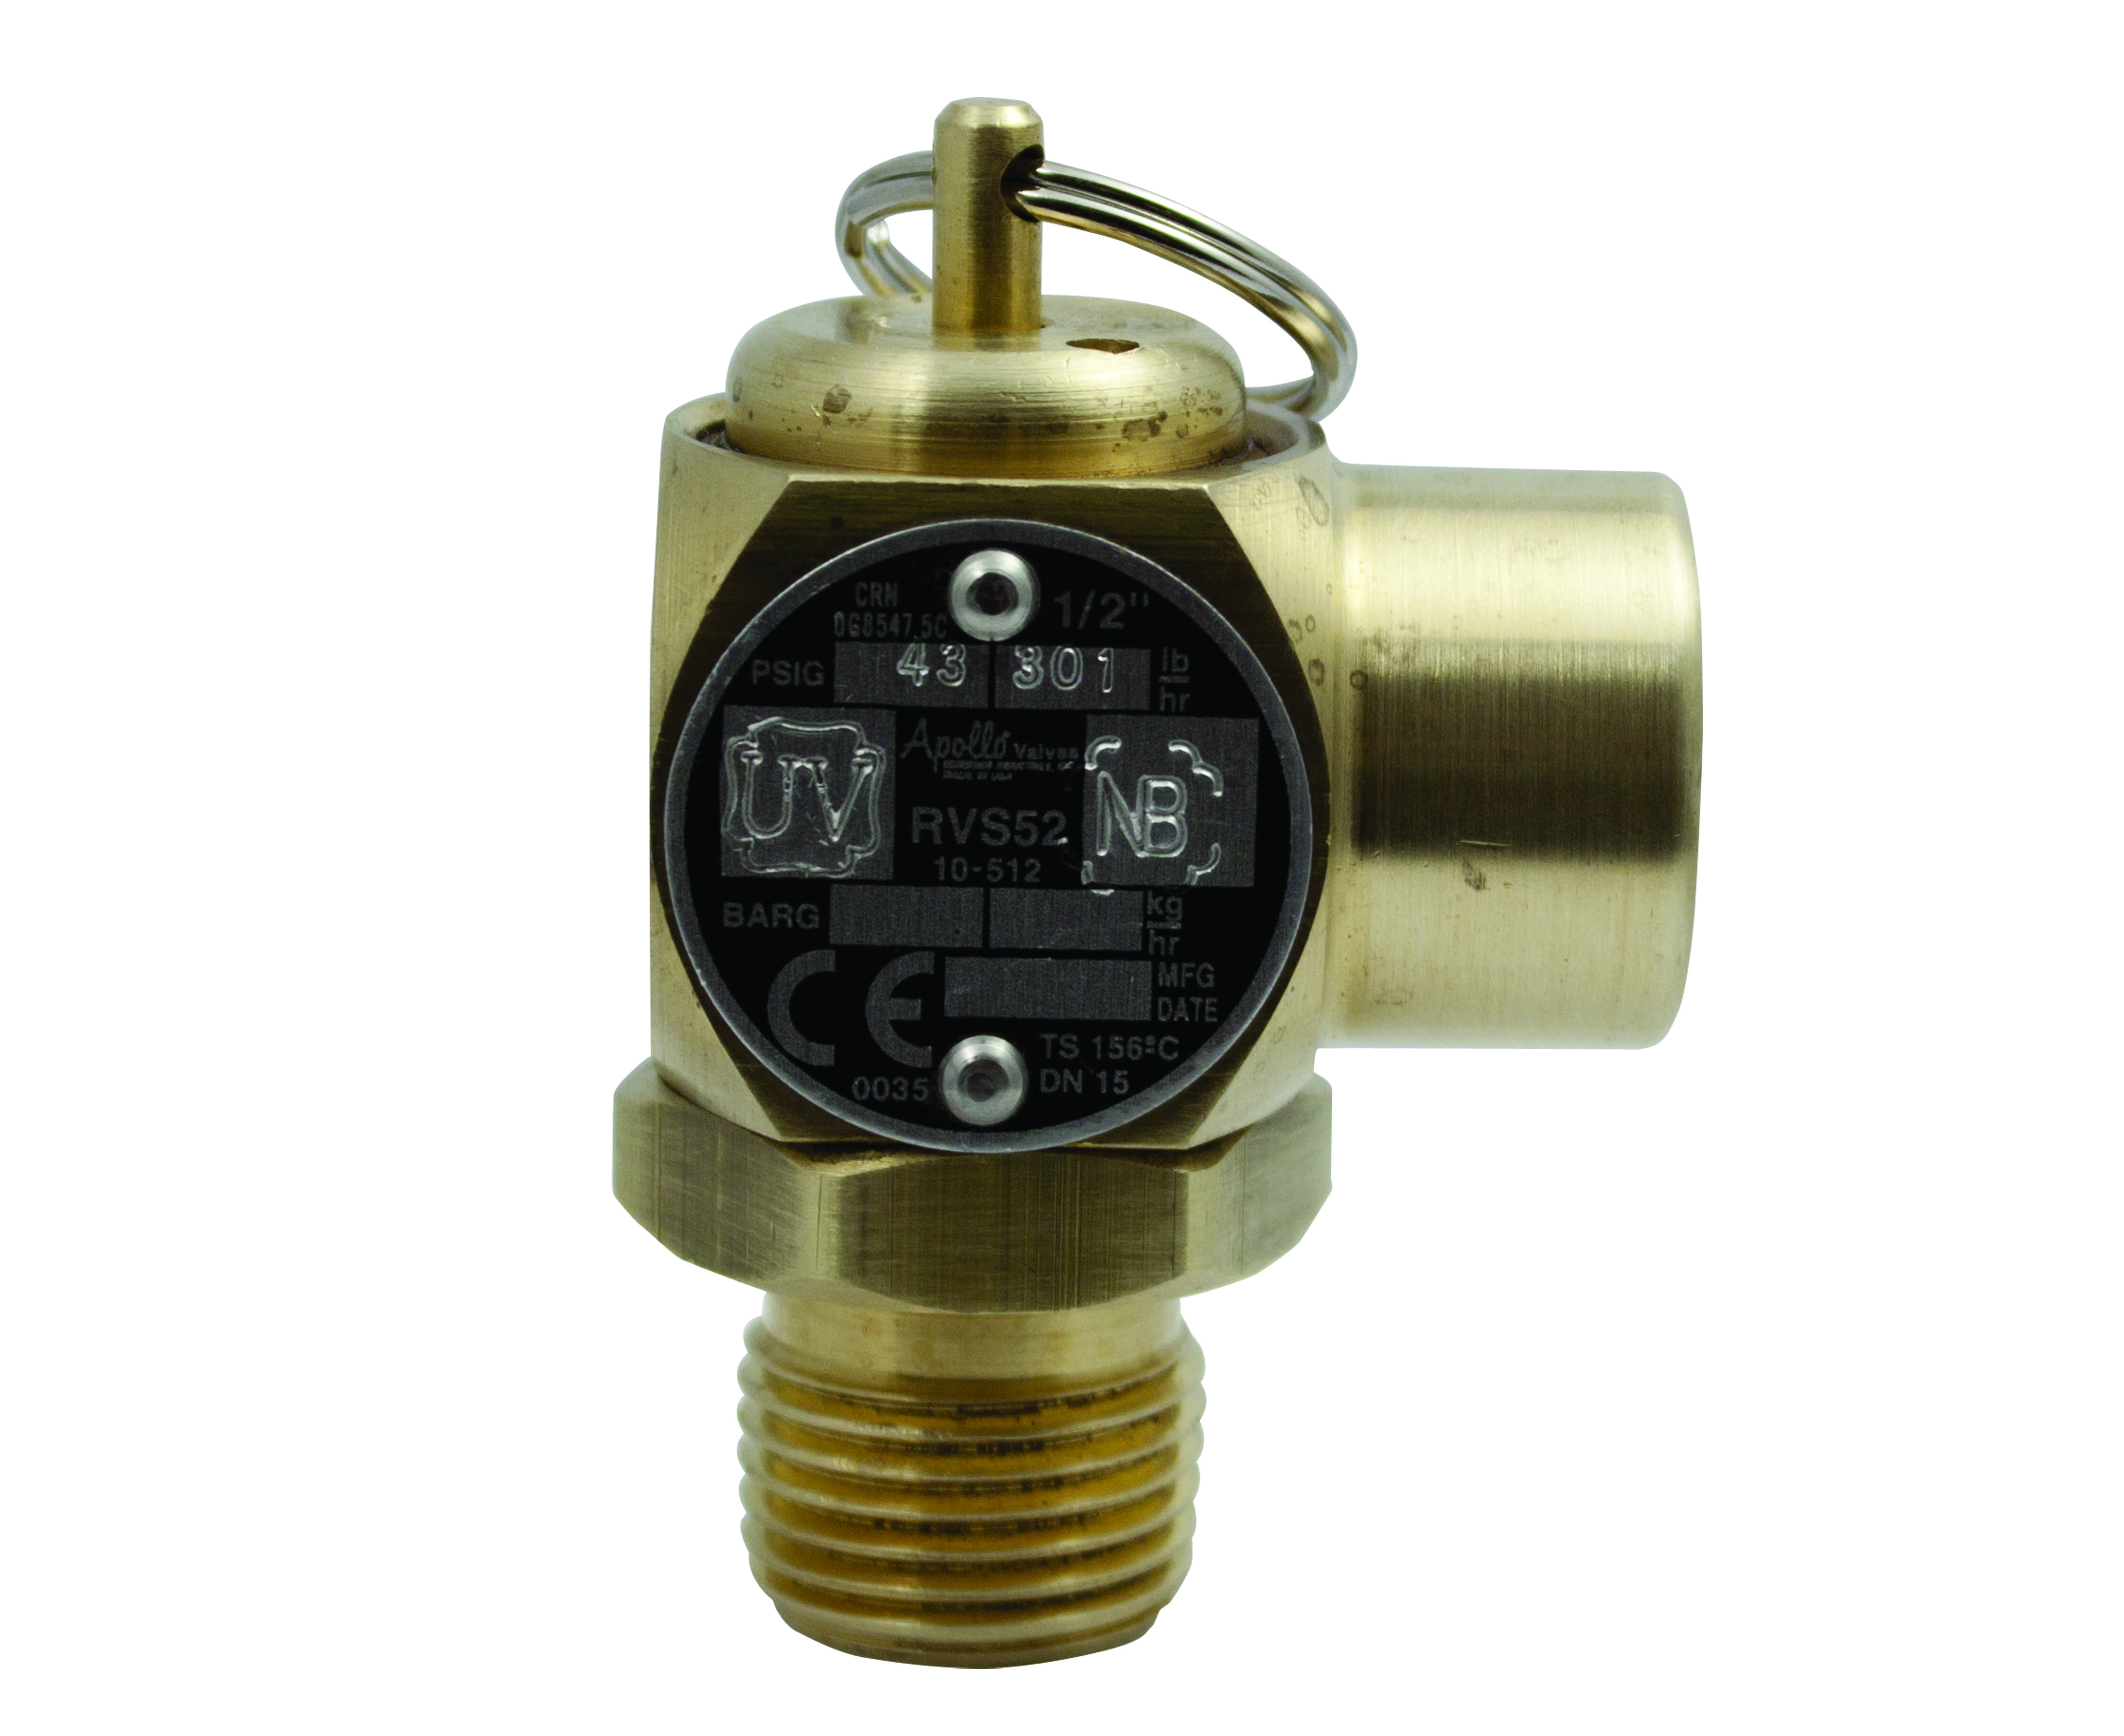 Preview image for Apollo ASME Sec VIII Steam Compact Brass Safety Relief Valves with Plain Brass Finish, Test Report (MNPT x FNPT)